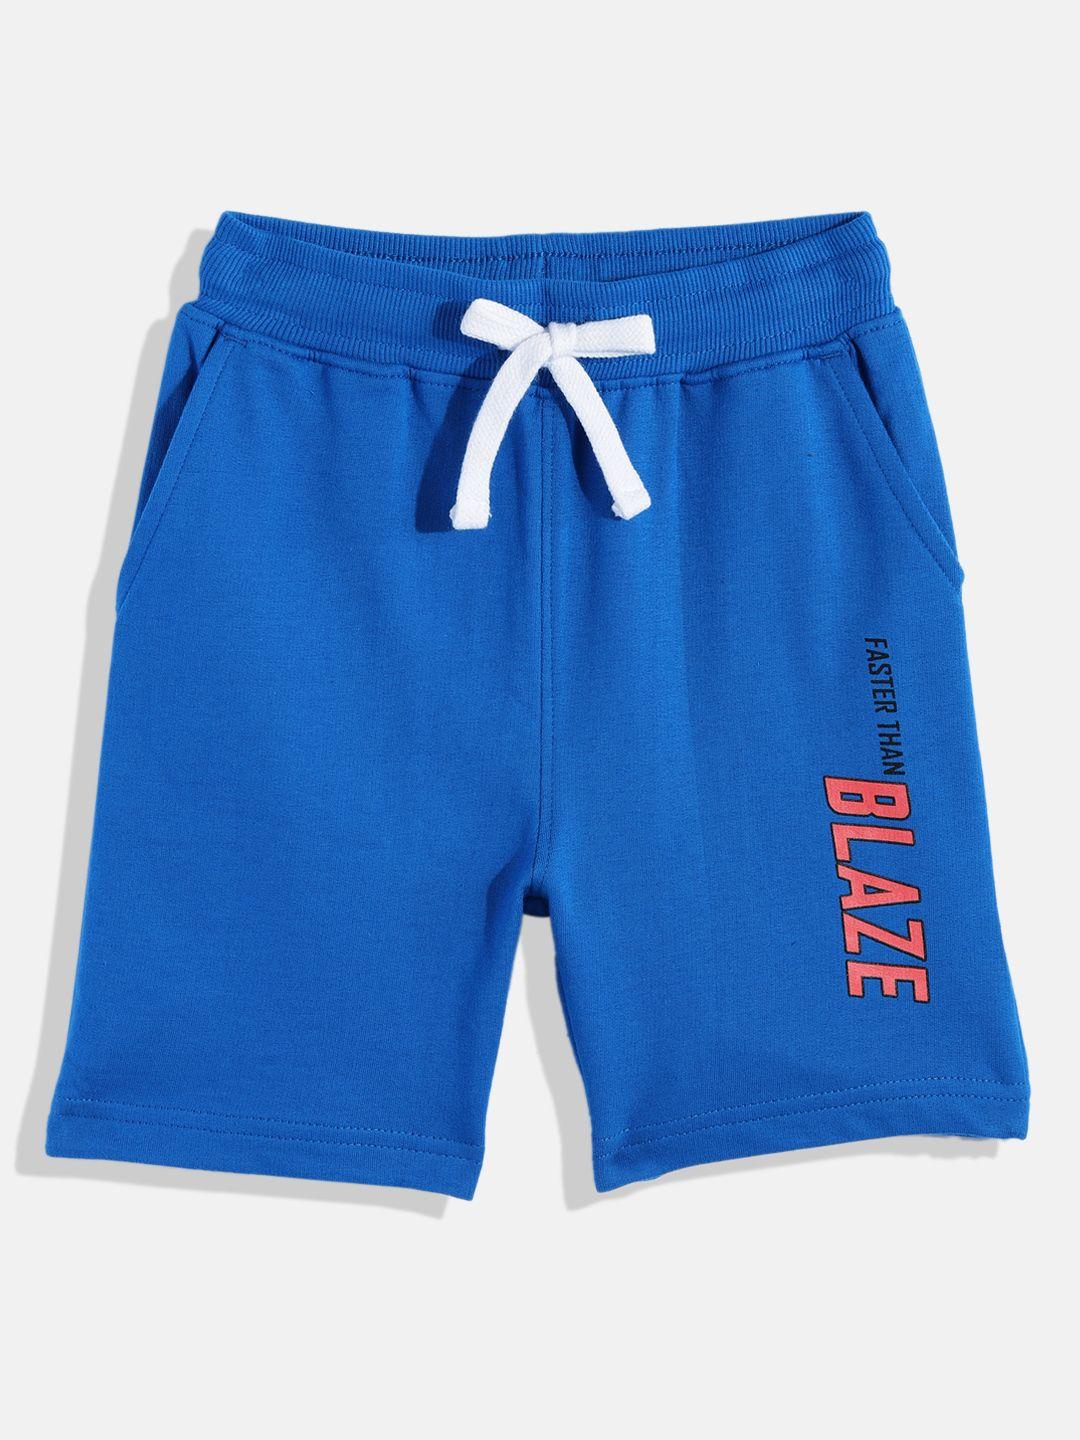 miss & chief boys blue solid pure cotton regular shorts with print detail